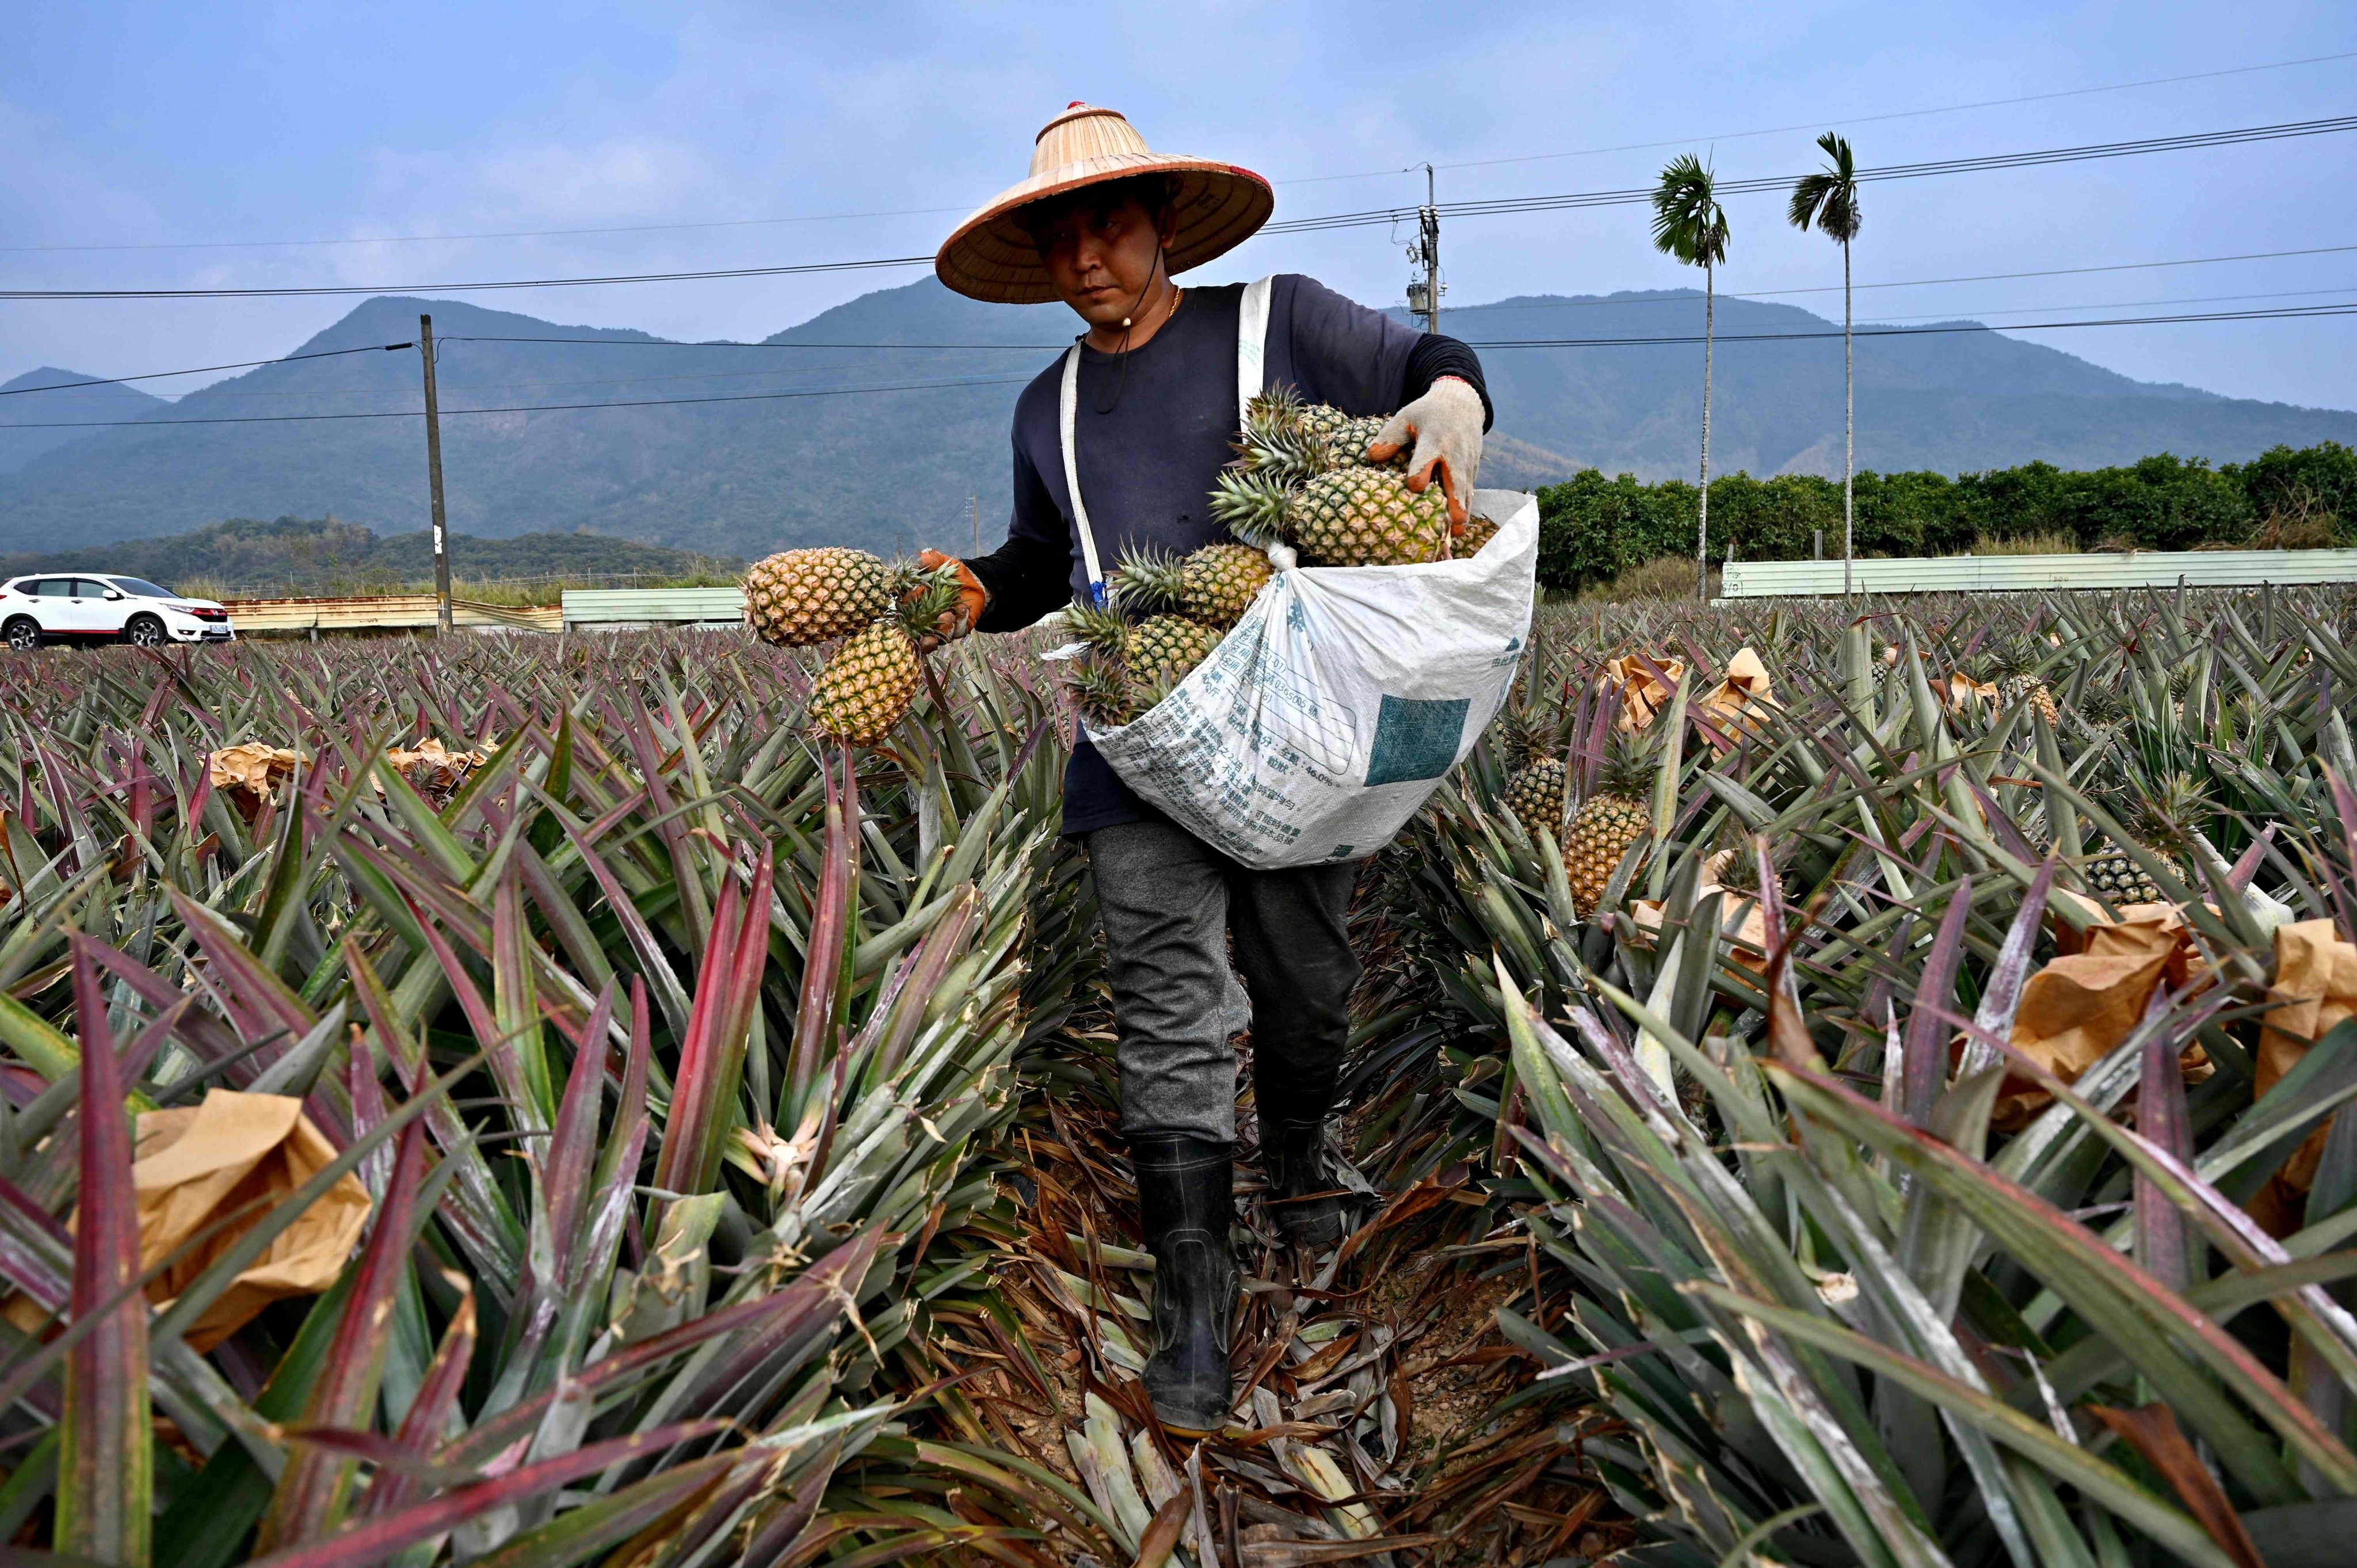 
Export bans, like those levied on pineapples, have hampered agricultural cooperation between mainland China and Taiwan. Photo: AFP